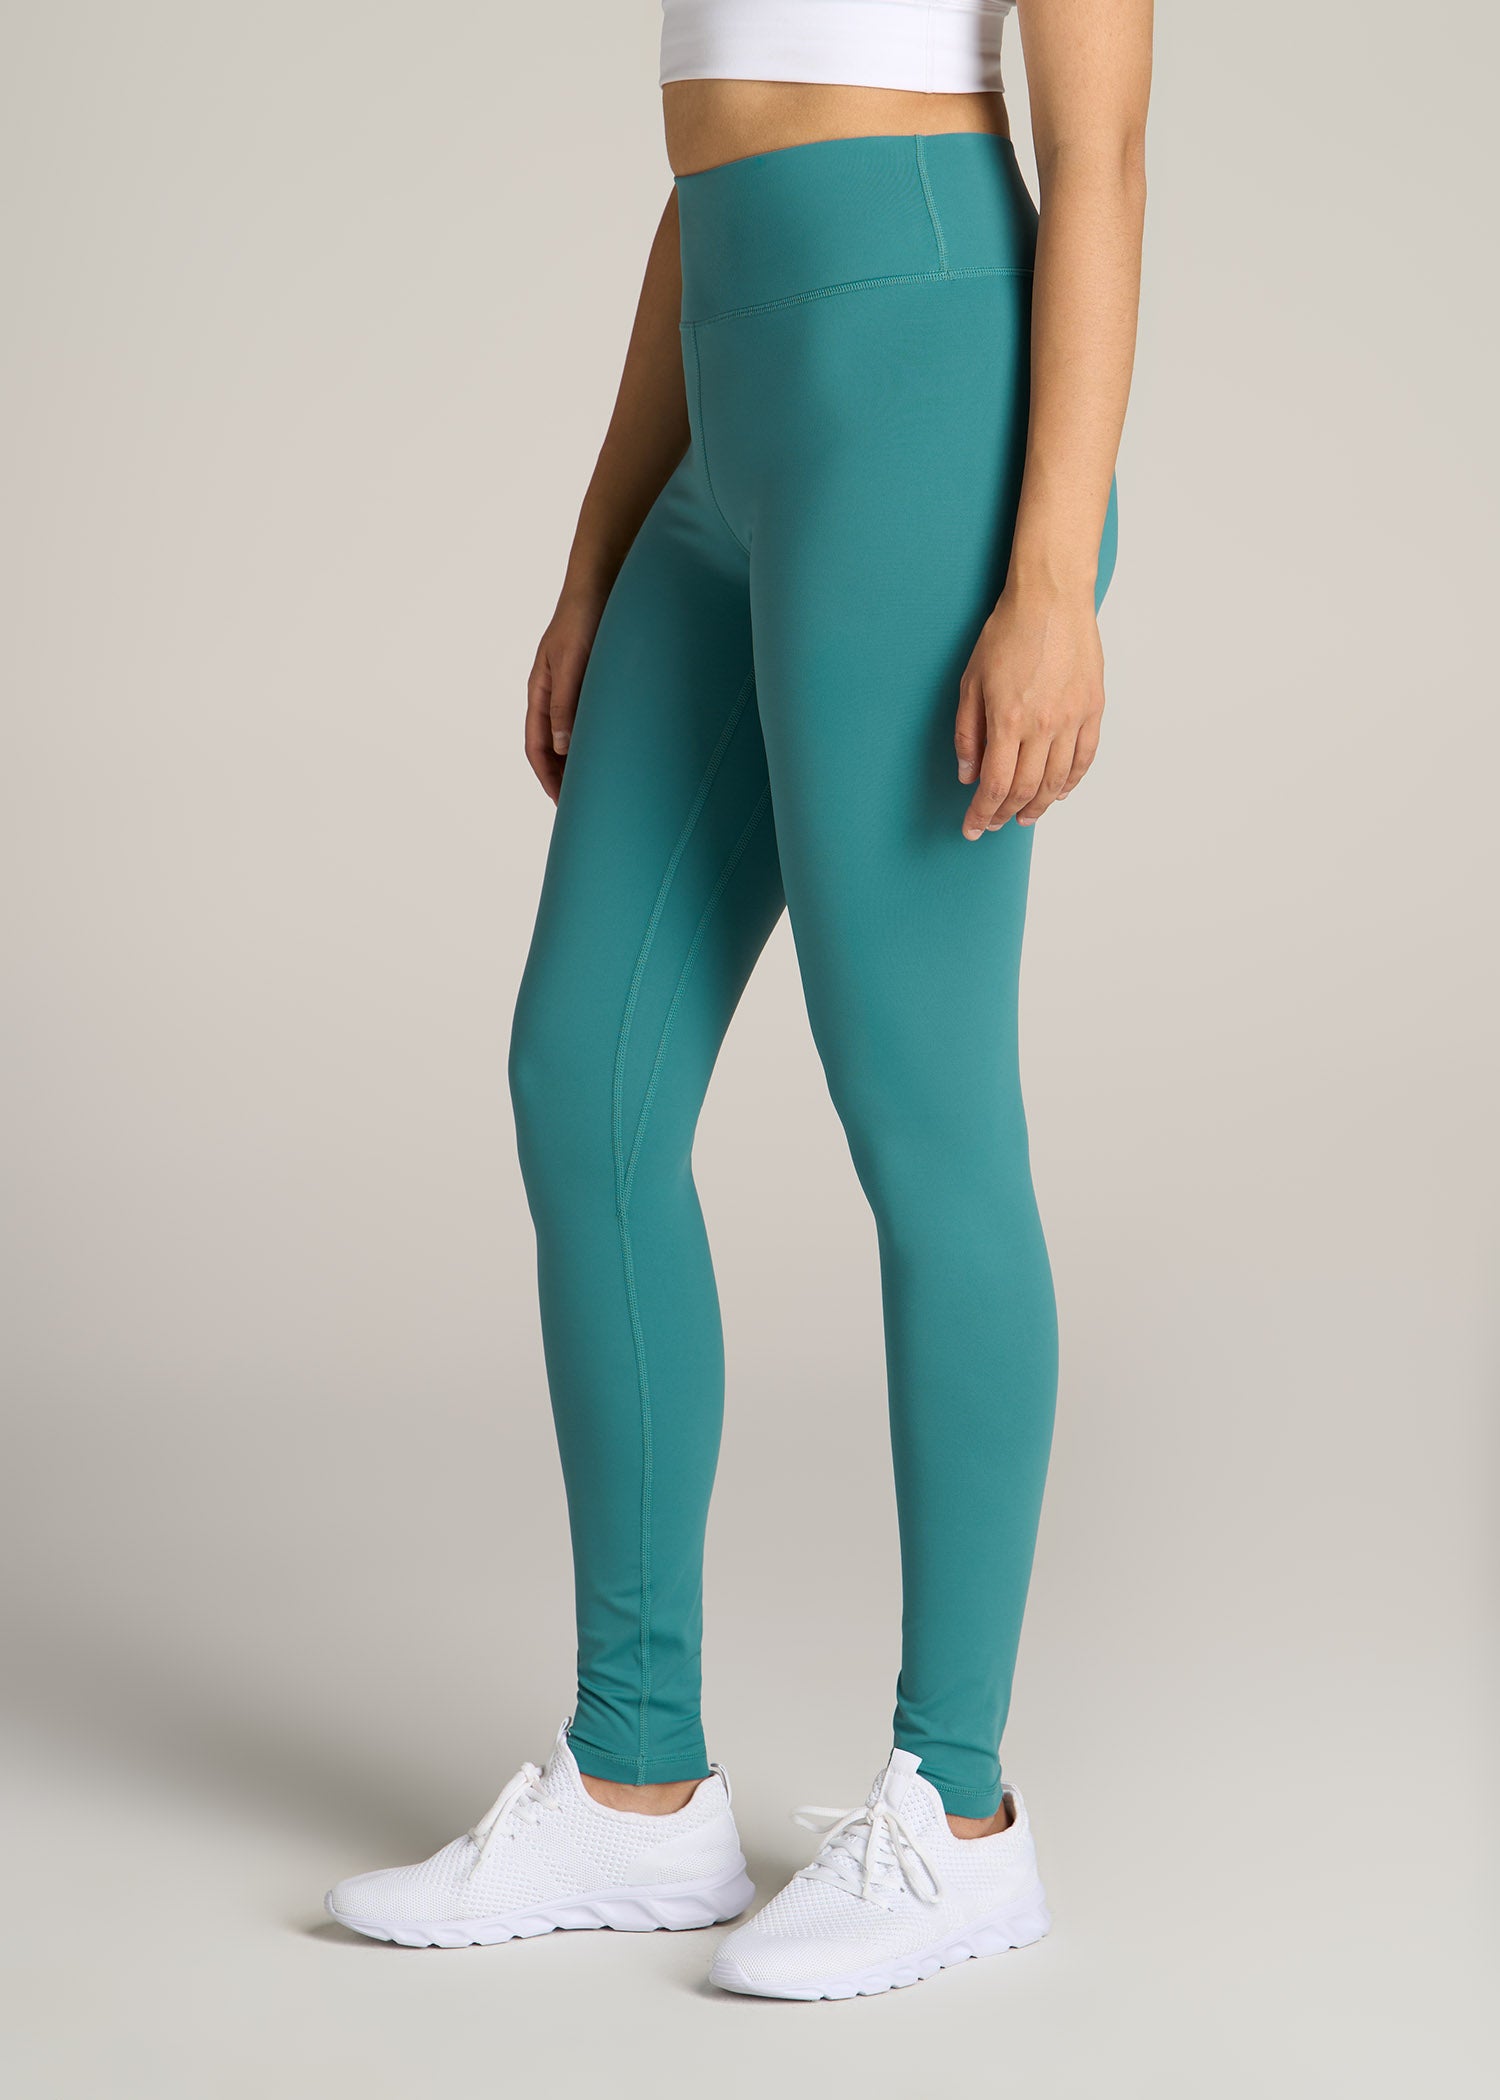 Movement High Rise Cheeky Leggings for Tall Women in Light Teal